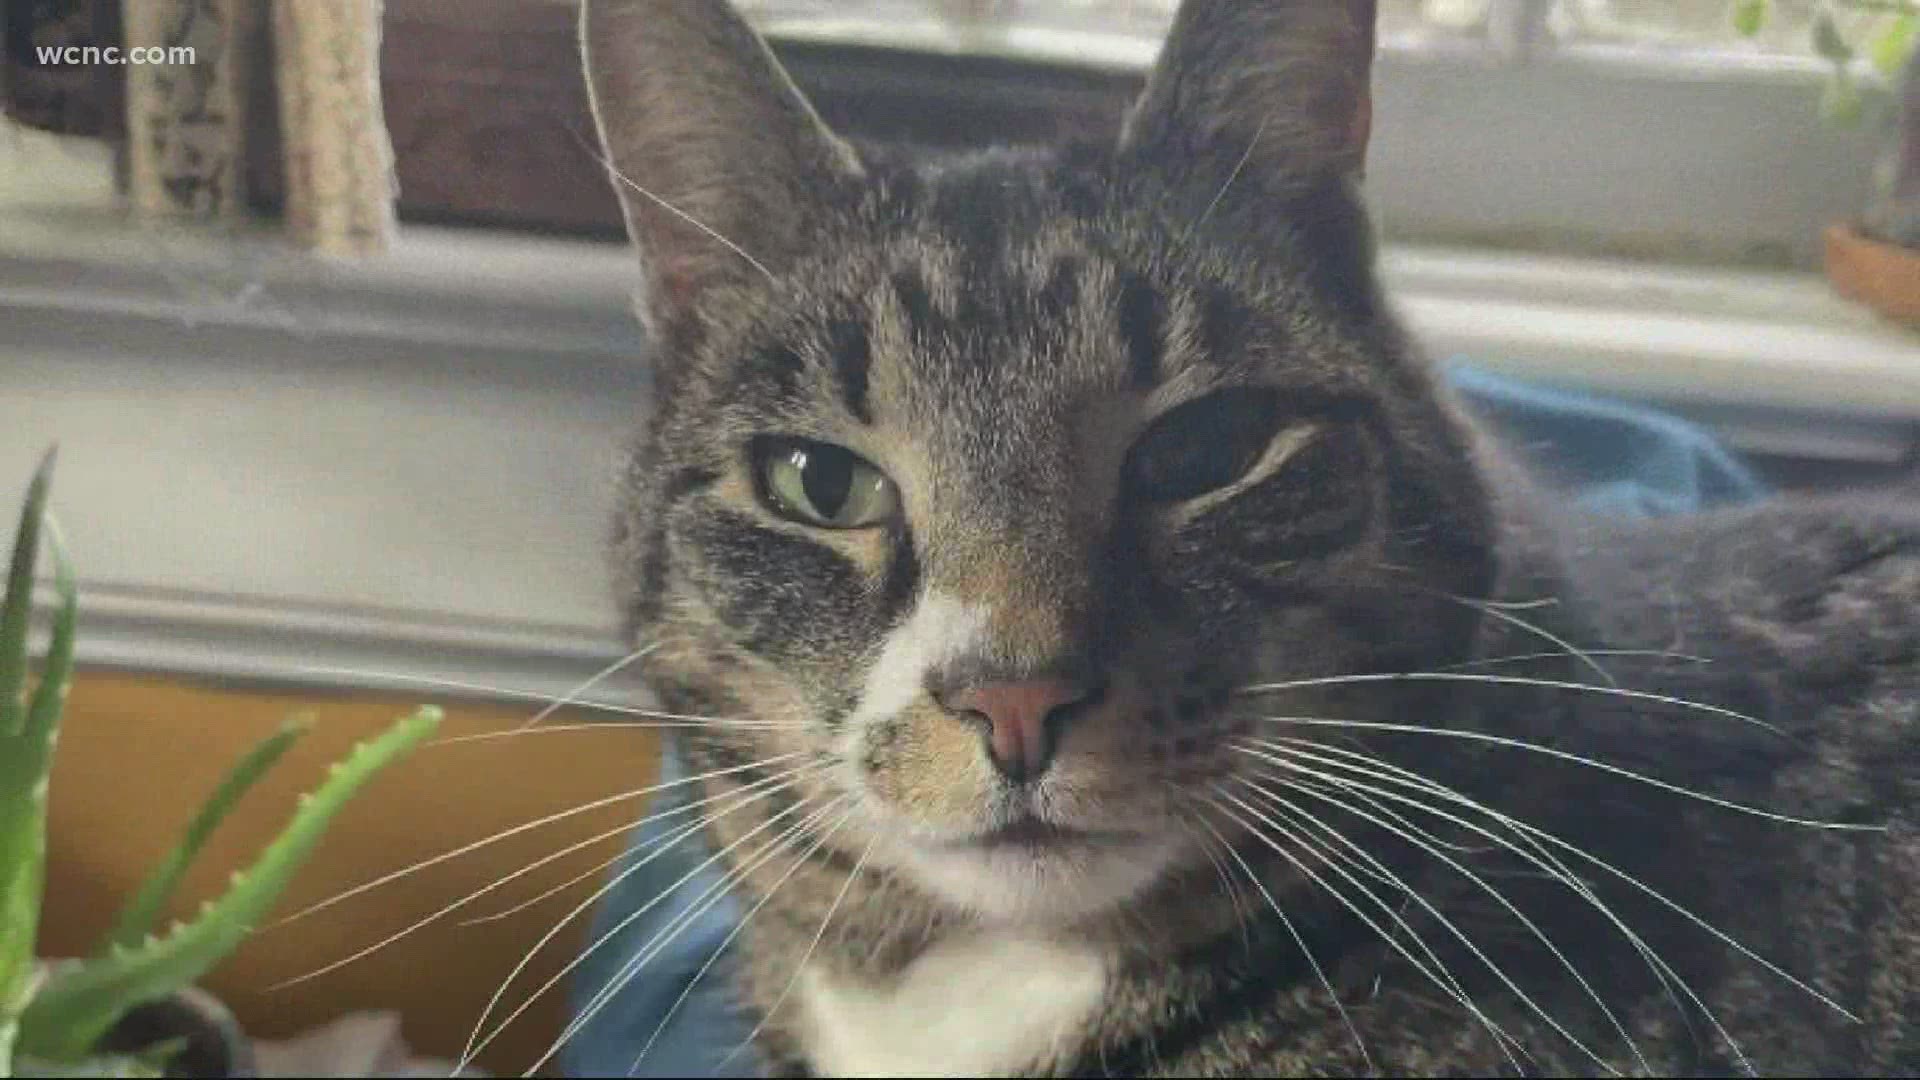 The family believes their cat died due to a coyote. Now, they're warning others in the hopes of saving someone else's pet.